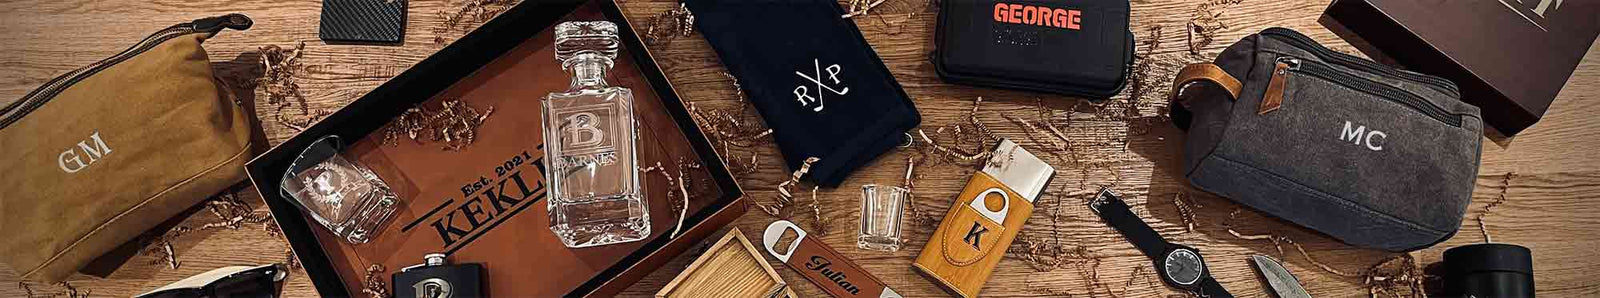 Ultimate List of Personalized Gift Ideas For Men • The Fashionable Housewife